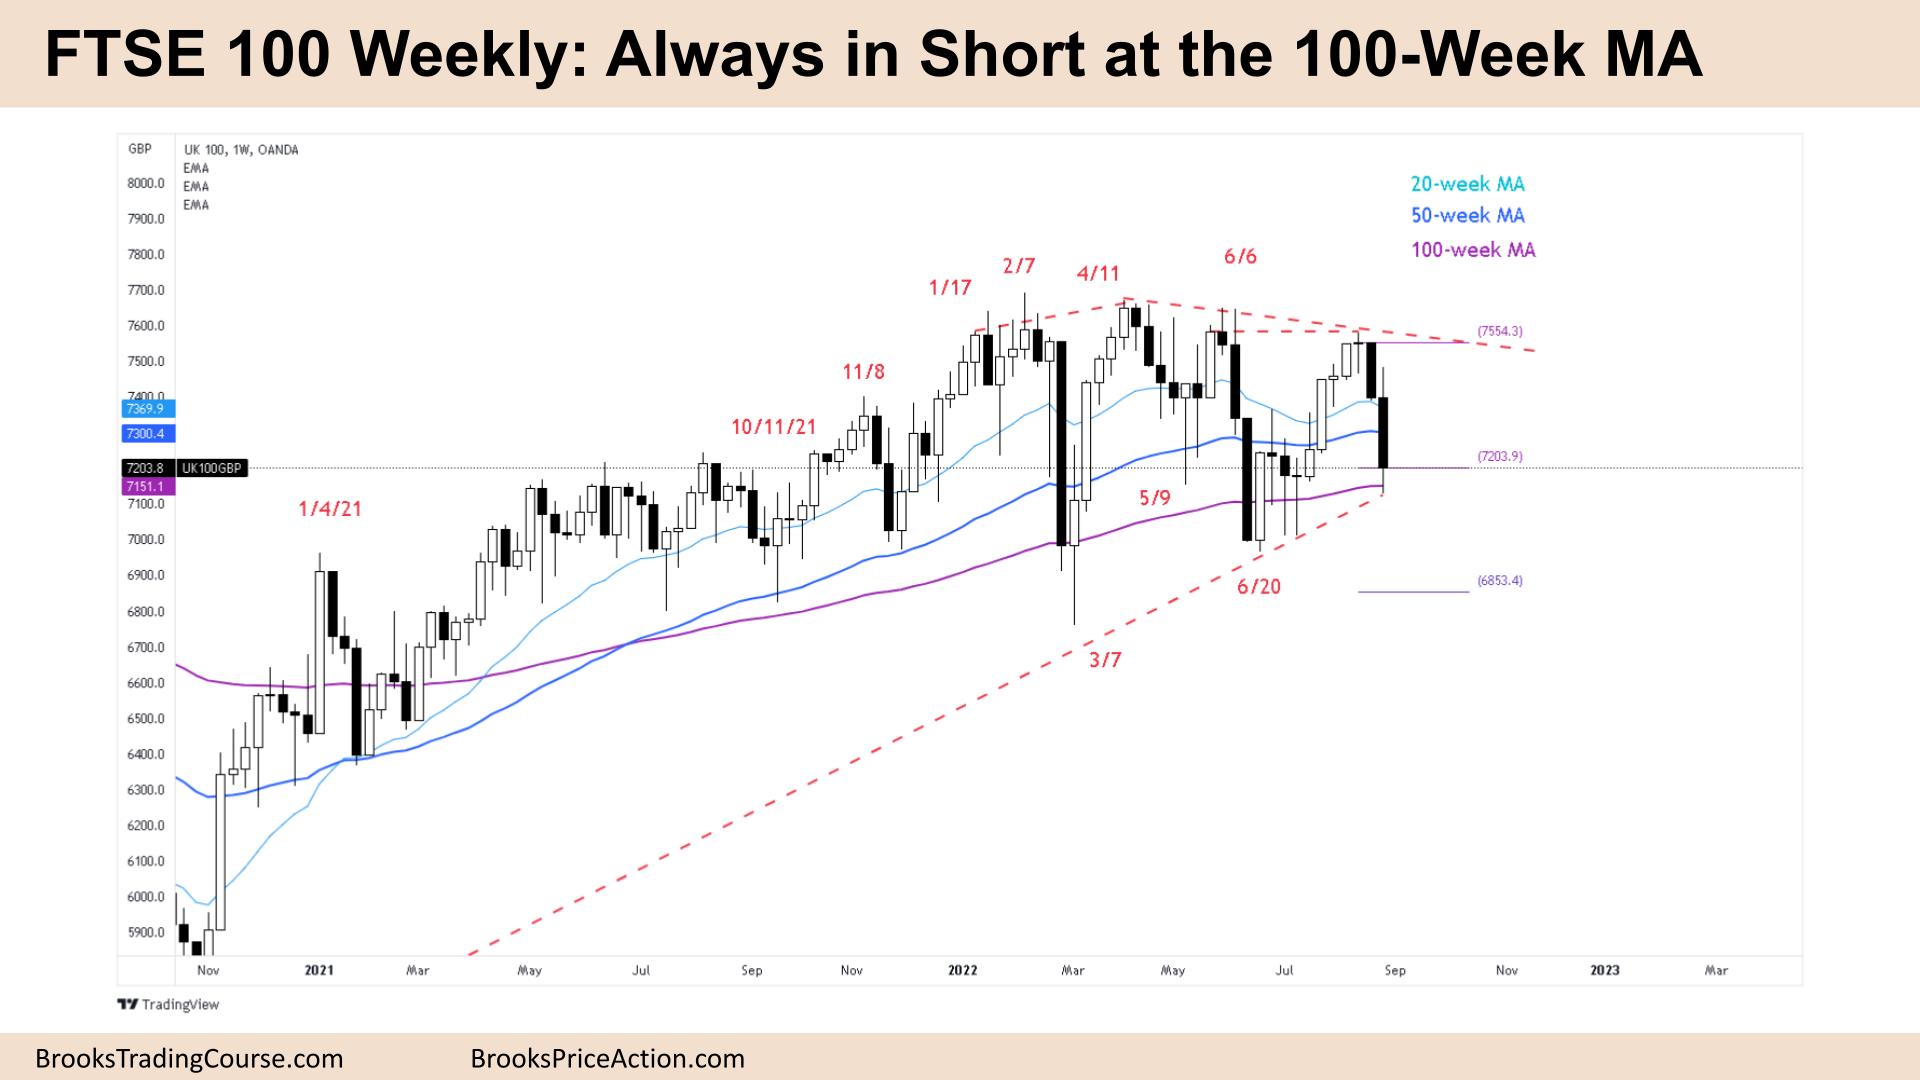 FTSE 100 Always in Short at the 100-Week MA